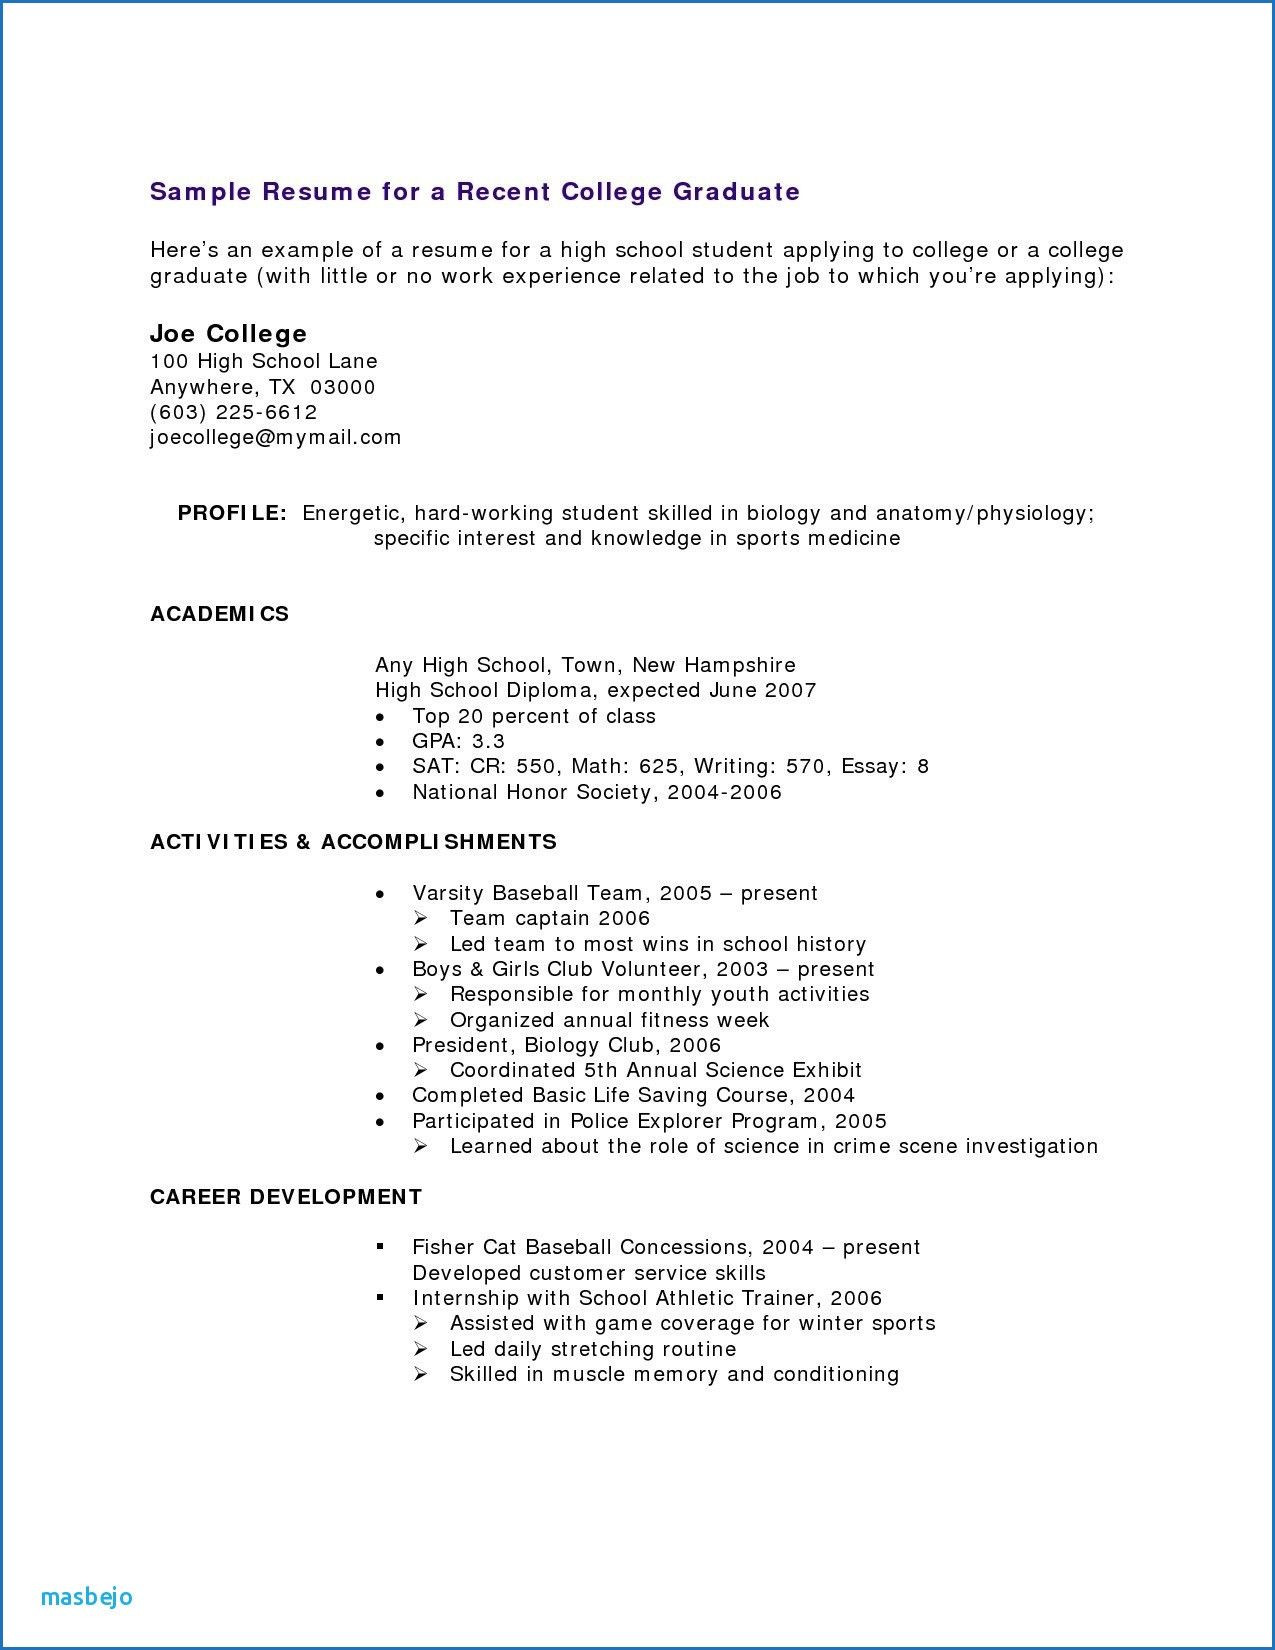 Sample Resume without High School Diploma Cover Letter: High School Diploma On Resume Examples